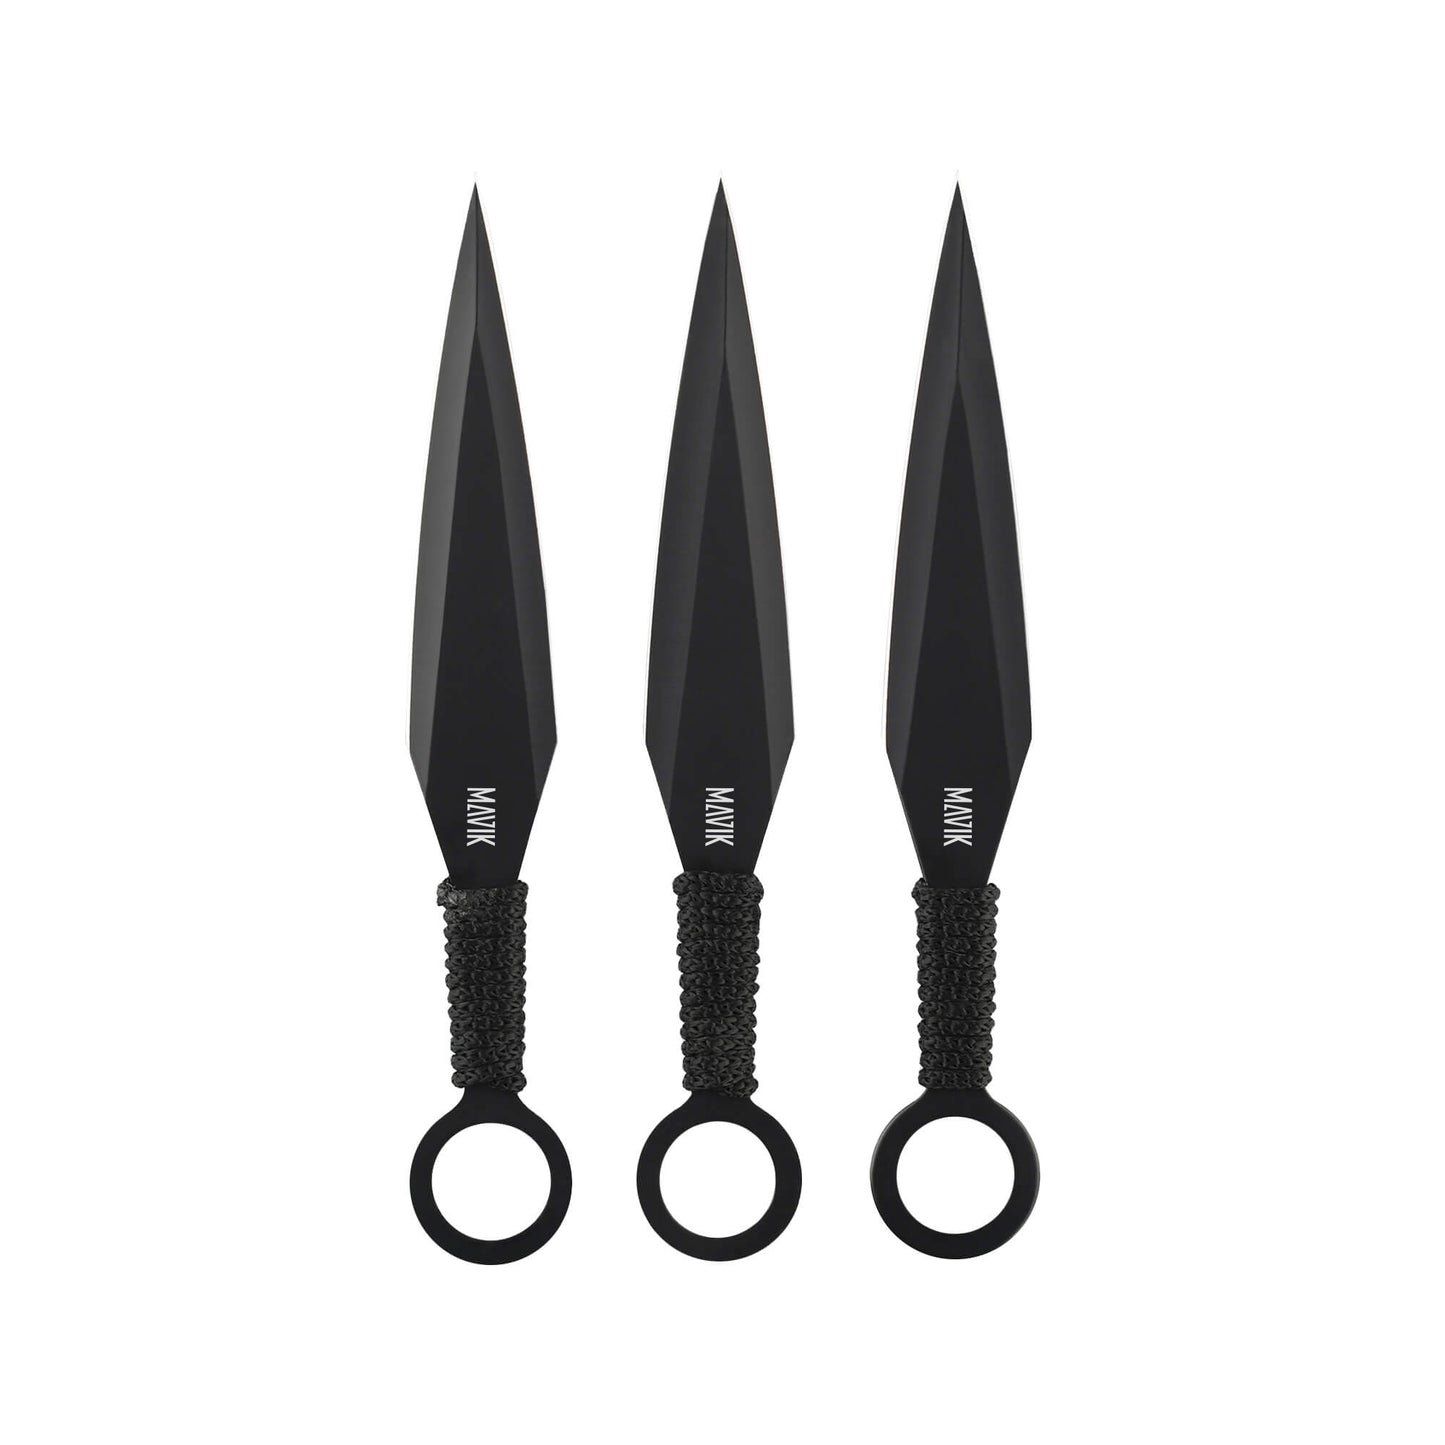 Tactical accessories Metis from Mavik Gear with 3 black 3CR13 Steel knives.